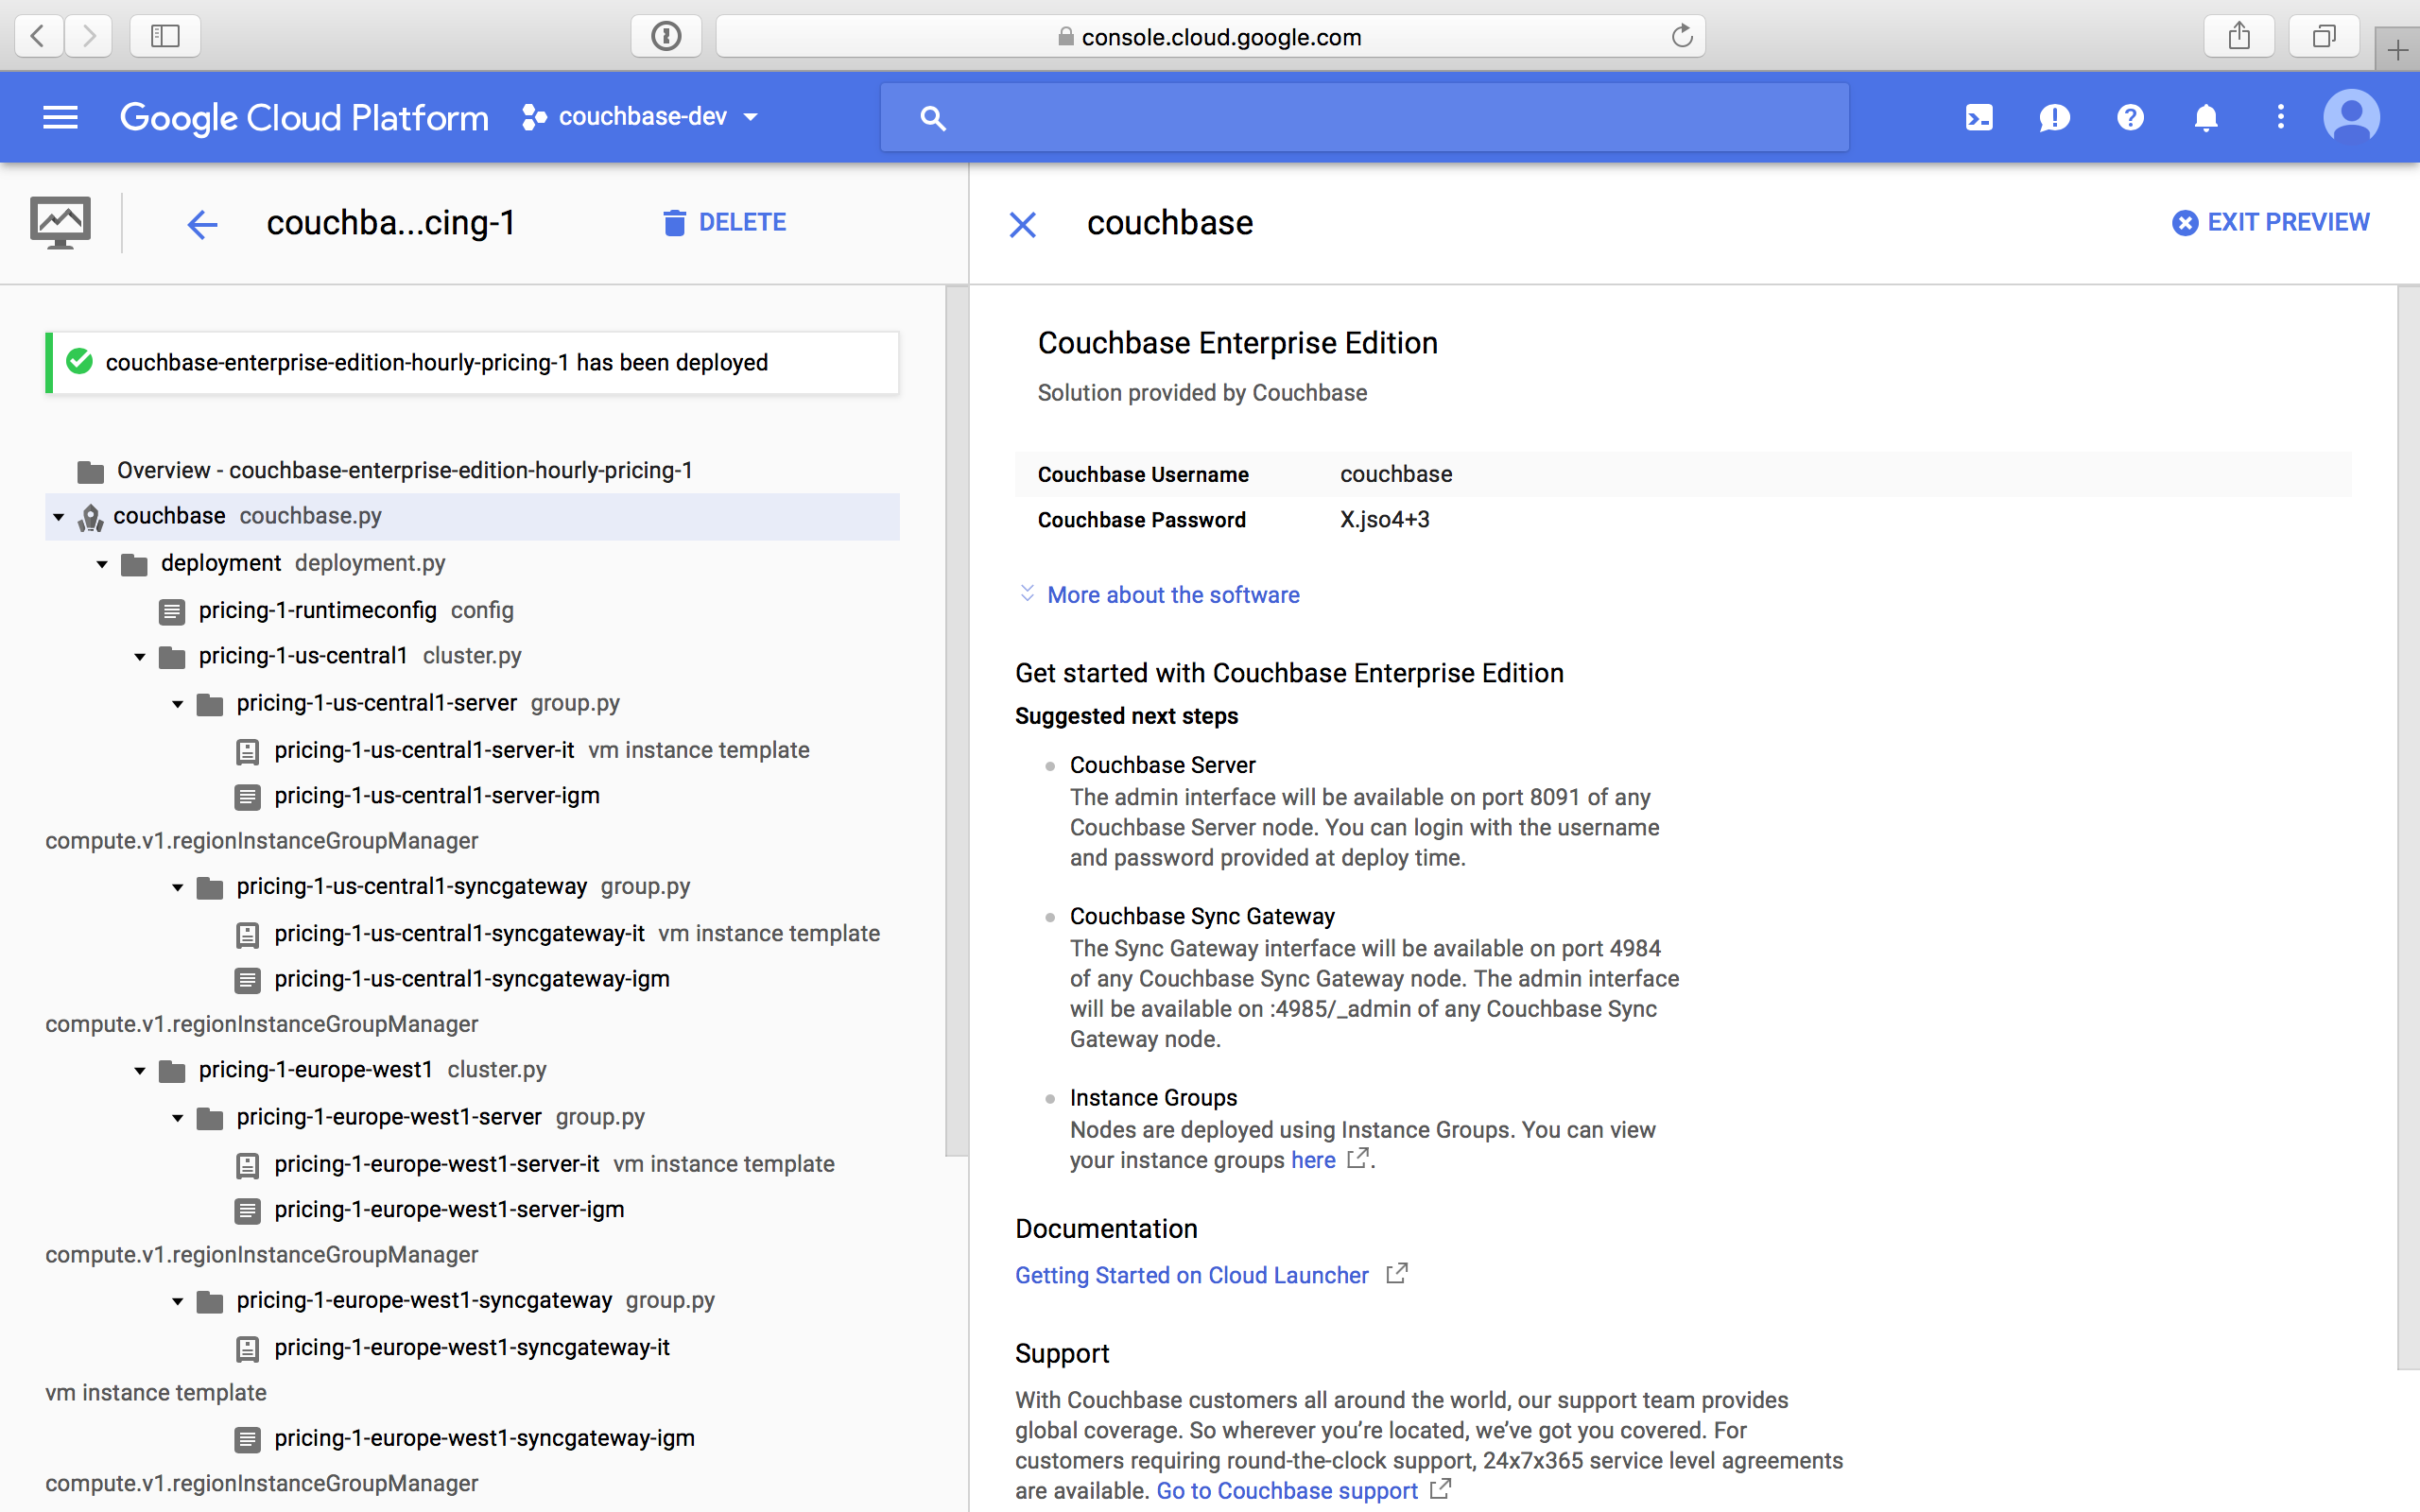 gcp new couchbase ee deploy done